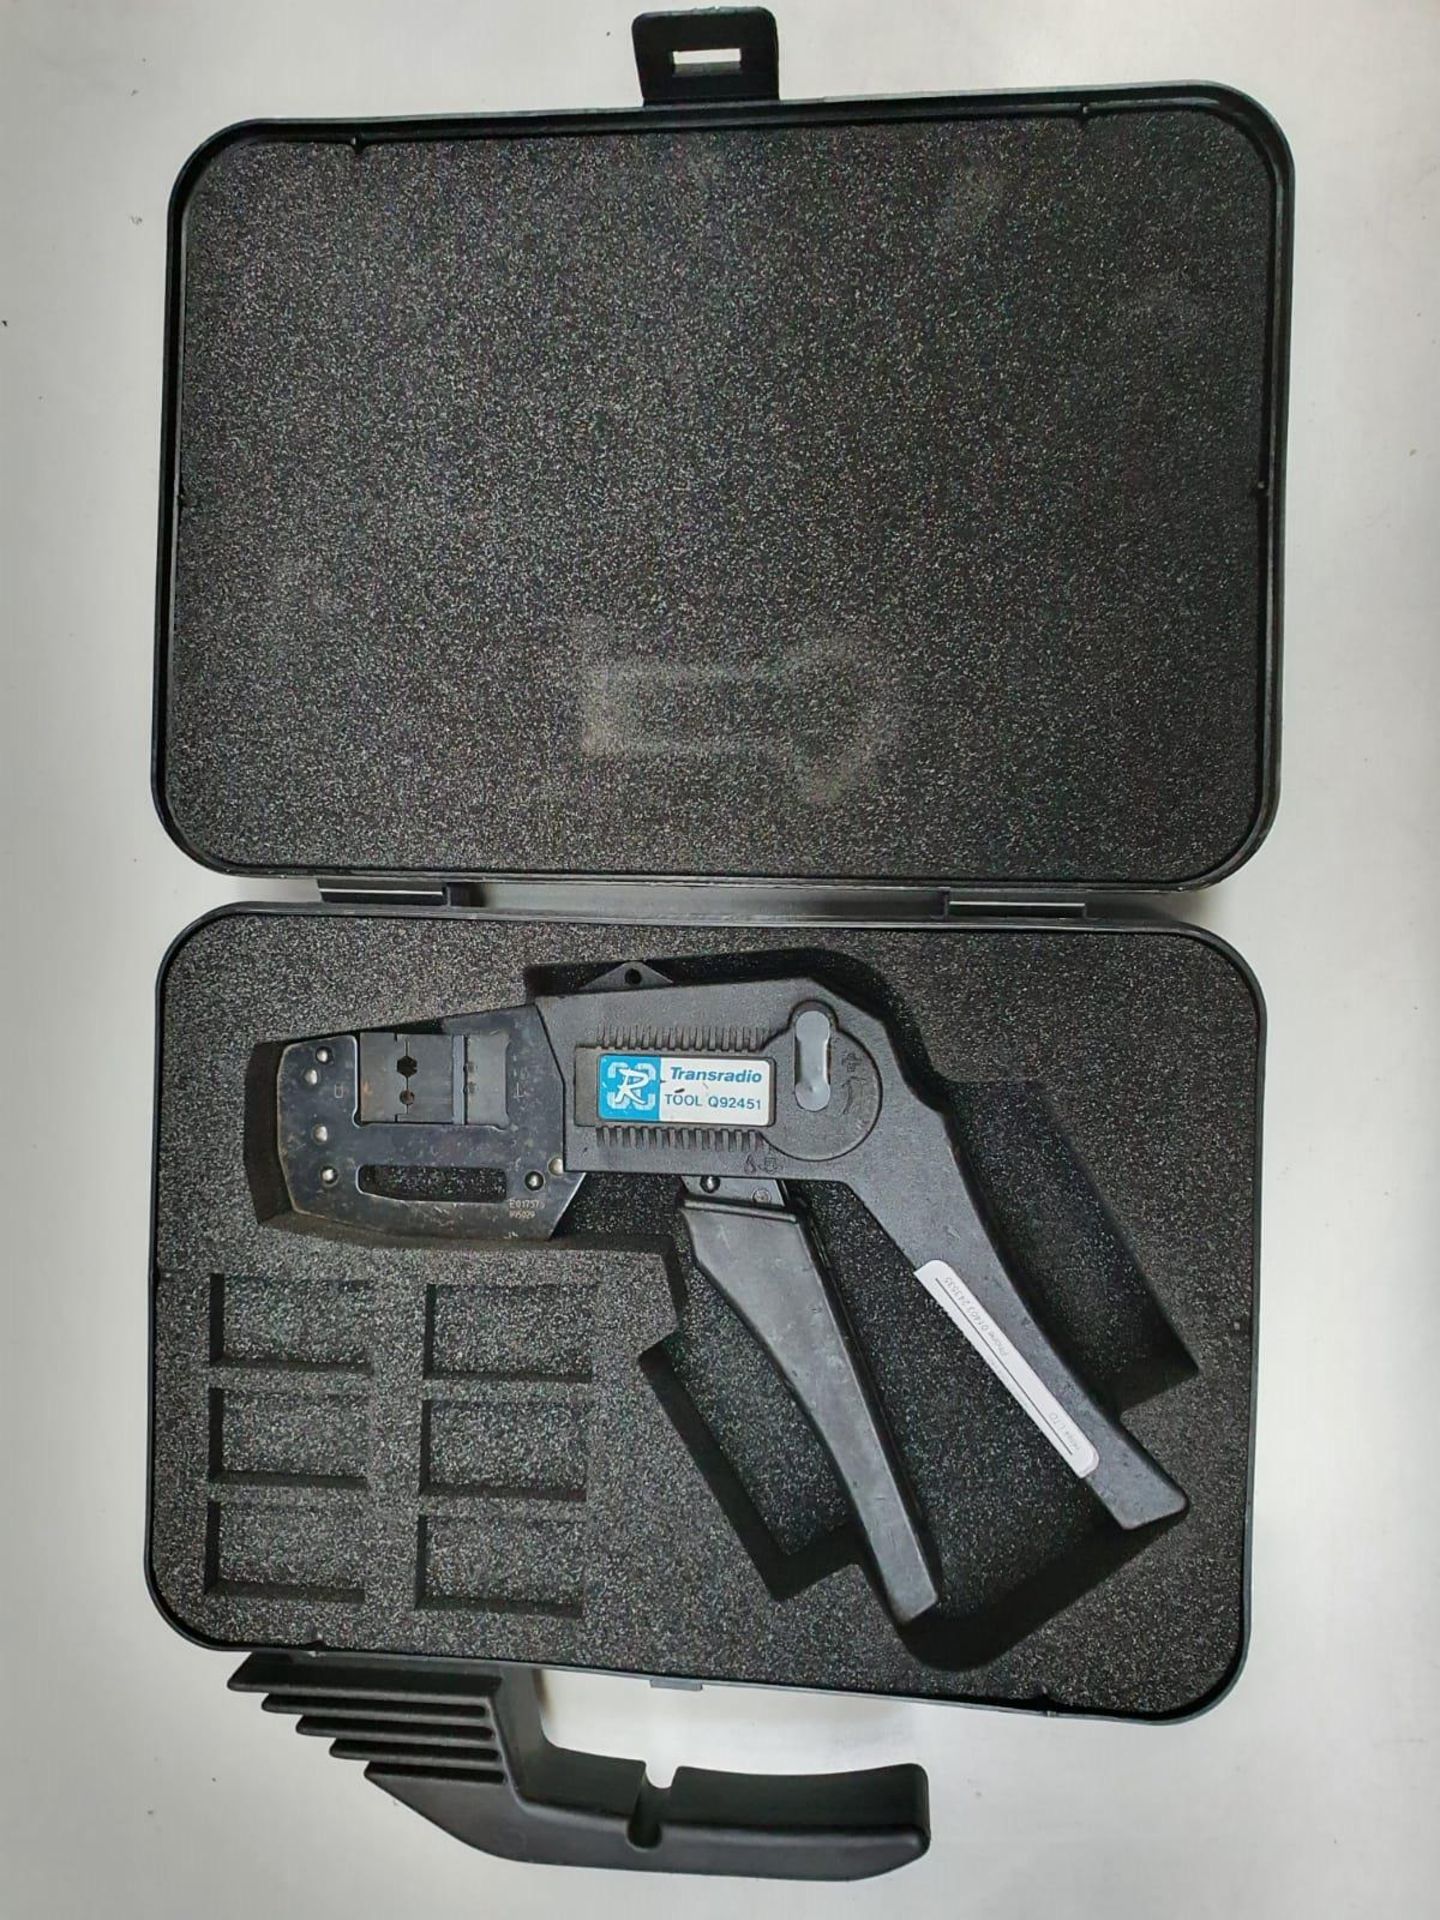 8 x Pressmaster PCC 5310 Crimp Tools With Cases - Includes Accessories - CL011 - WH1 - Location: - Image 4 of 4